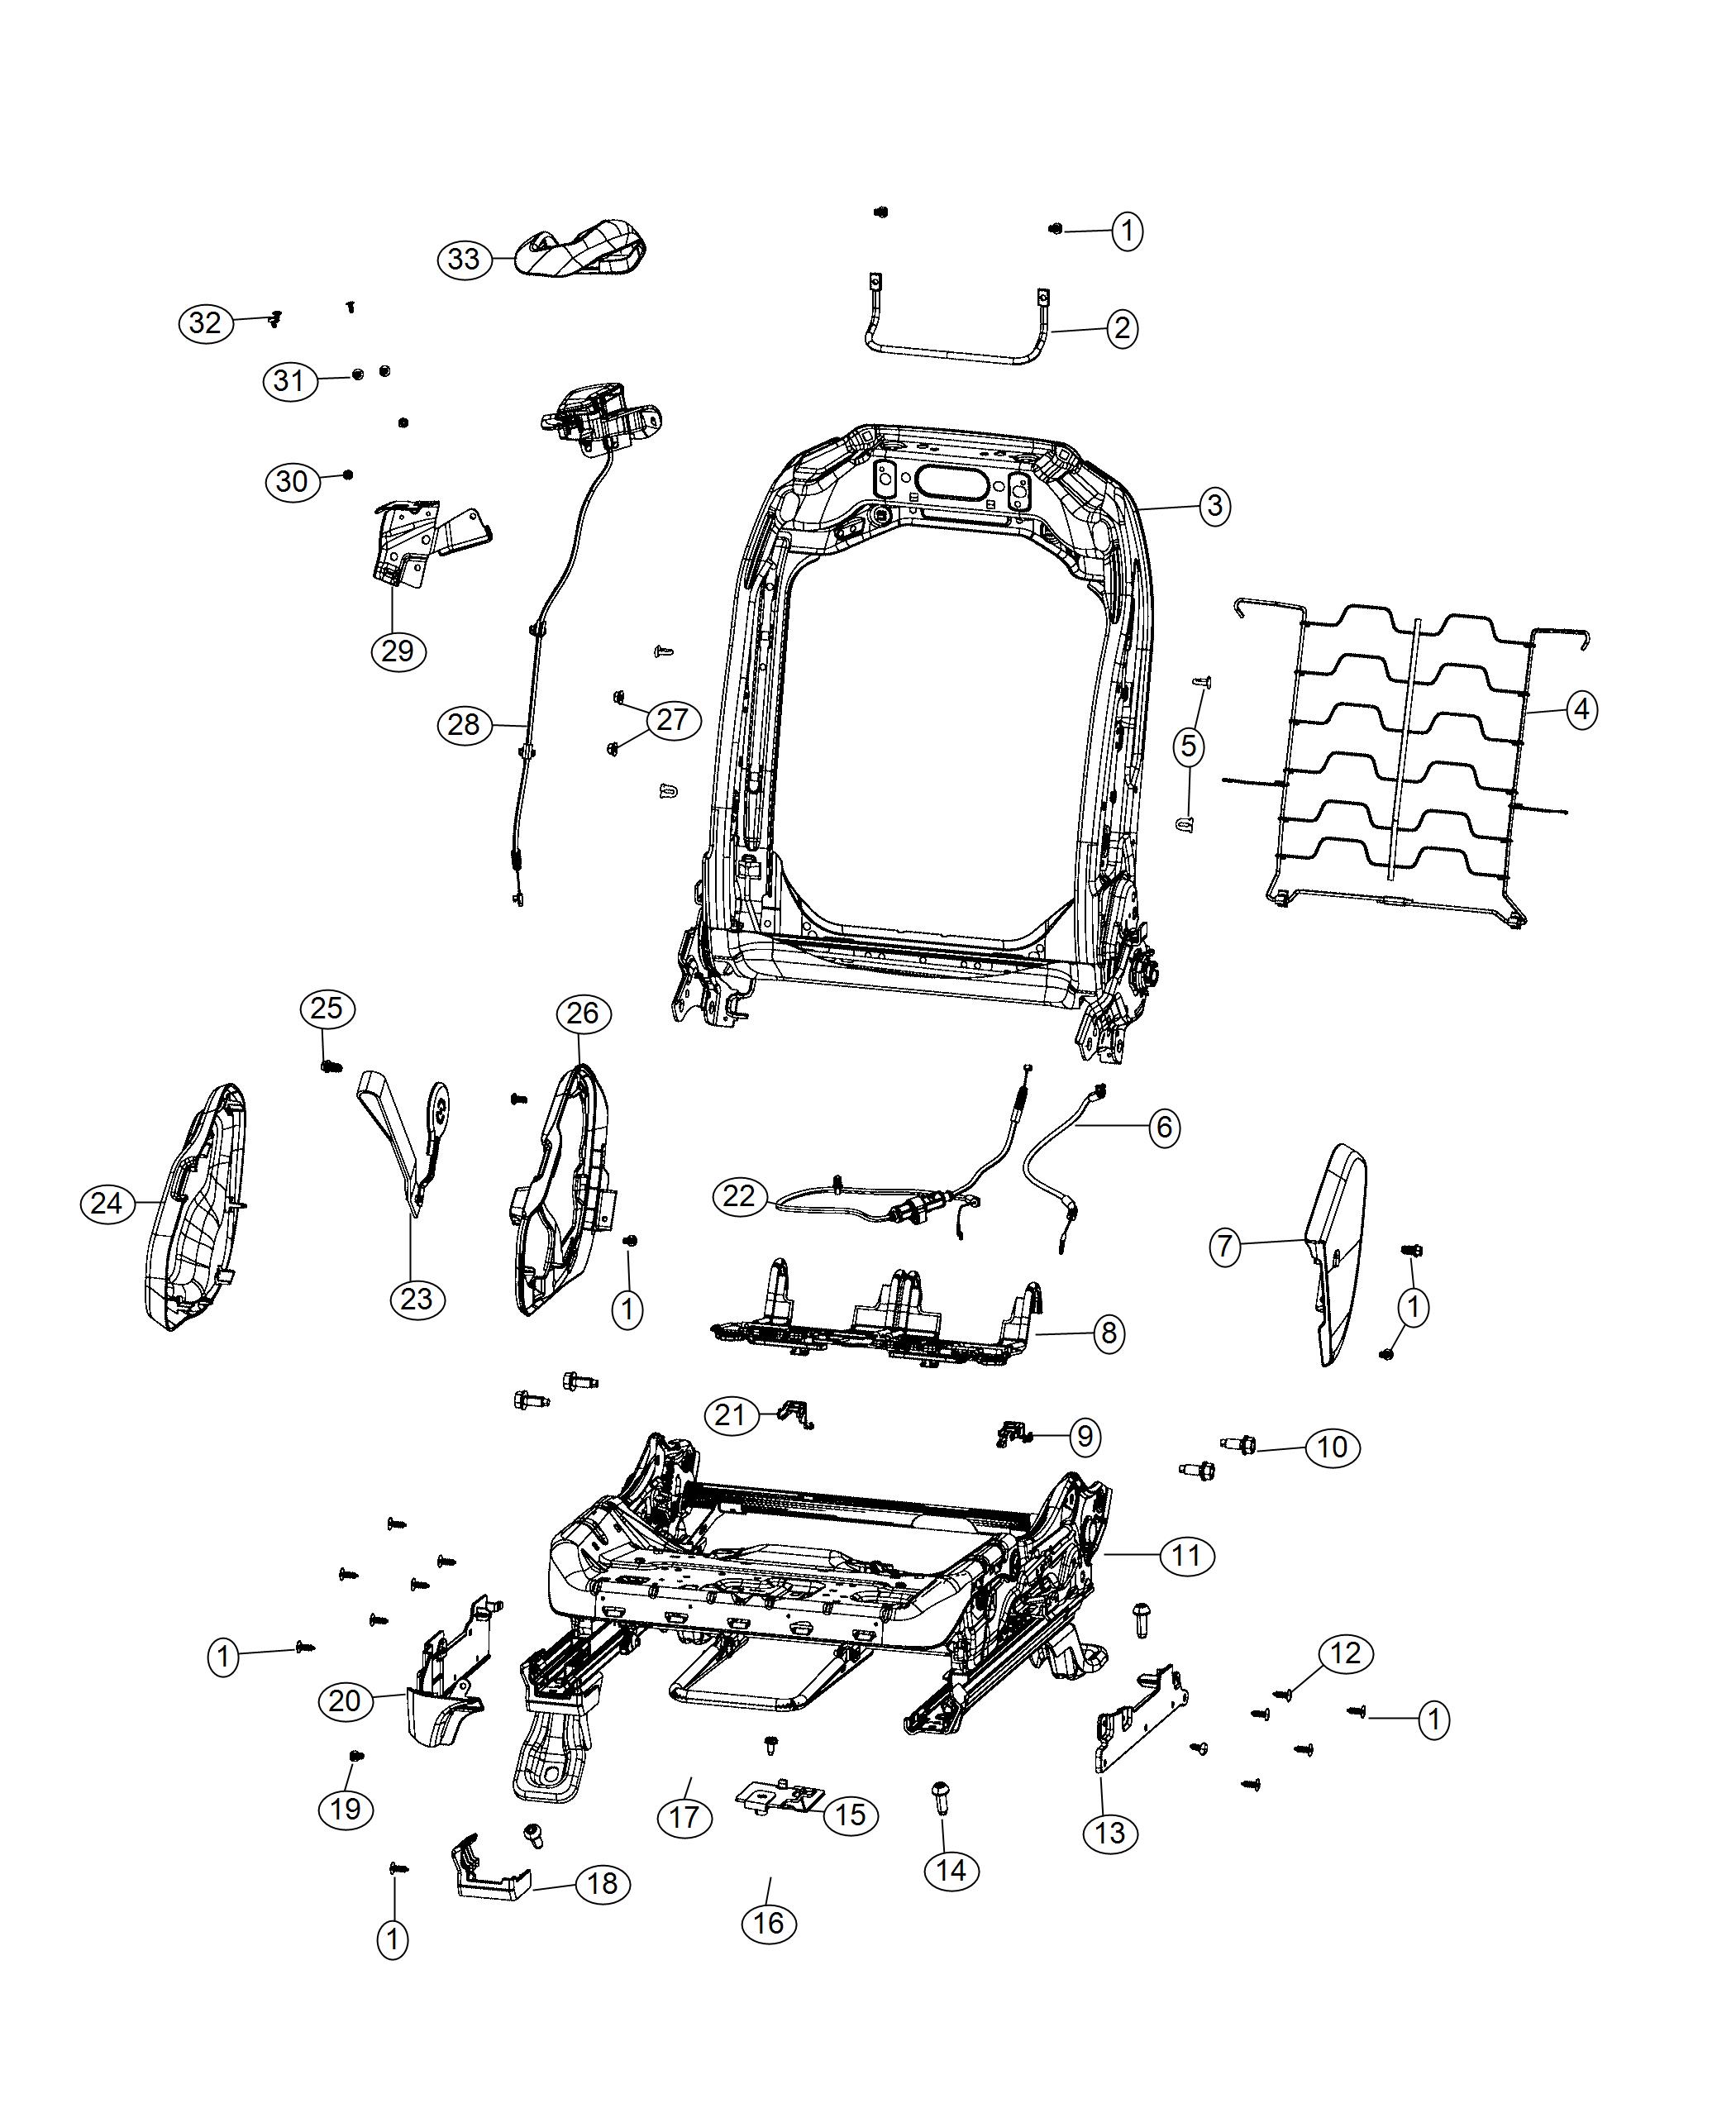 Adjusters, Recliners, Shields and Risers - Passenger Seat - 72 Body. Diagram